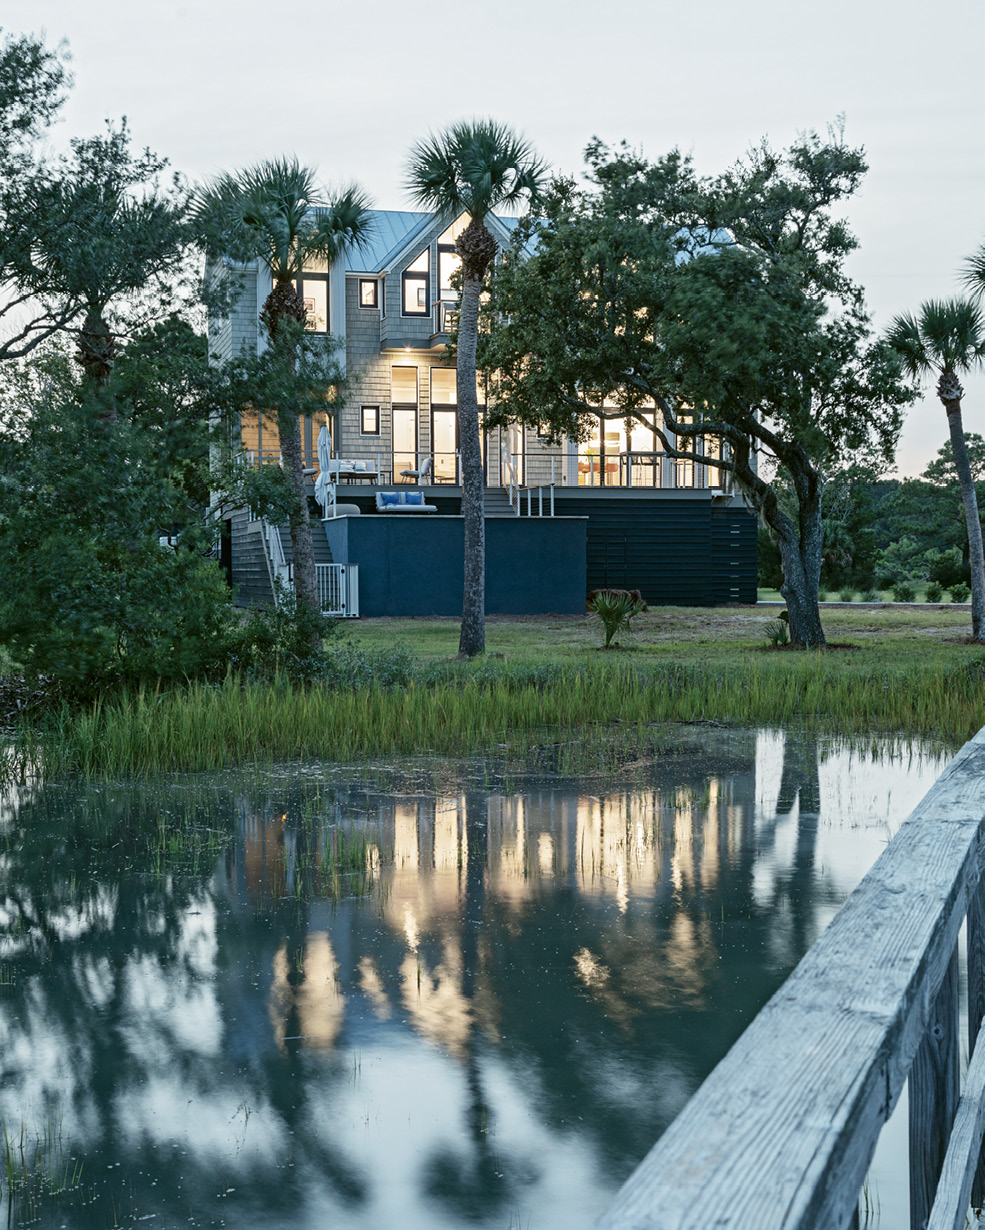 A newly built dock provides easy access to the marsh and extends toward the Atlantic Ocean.